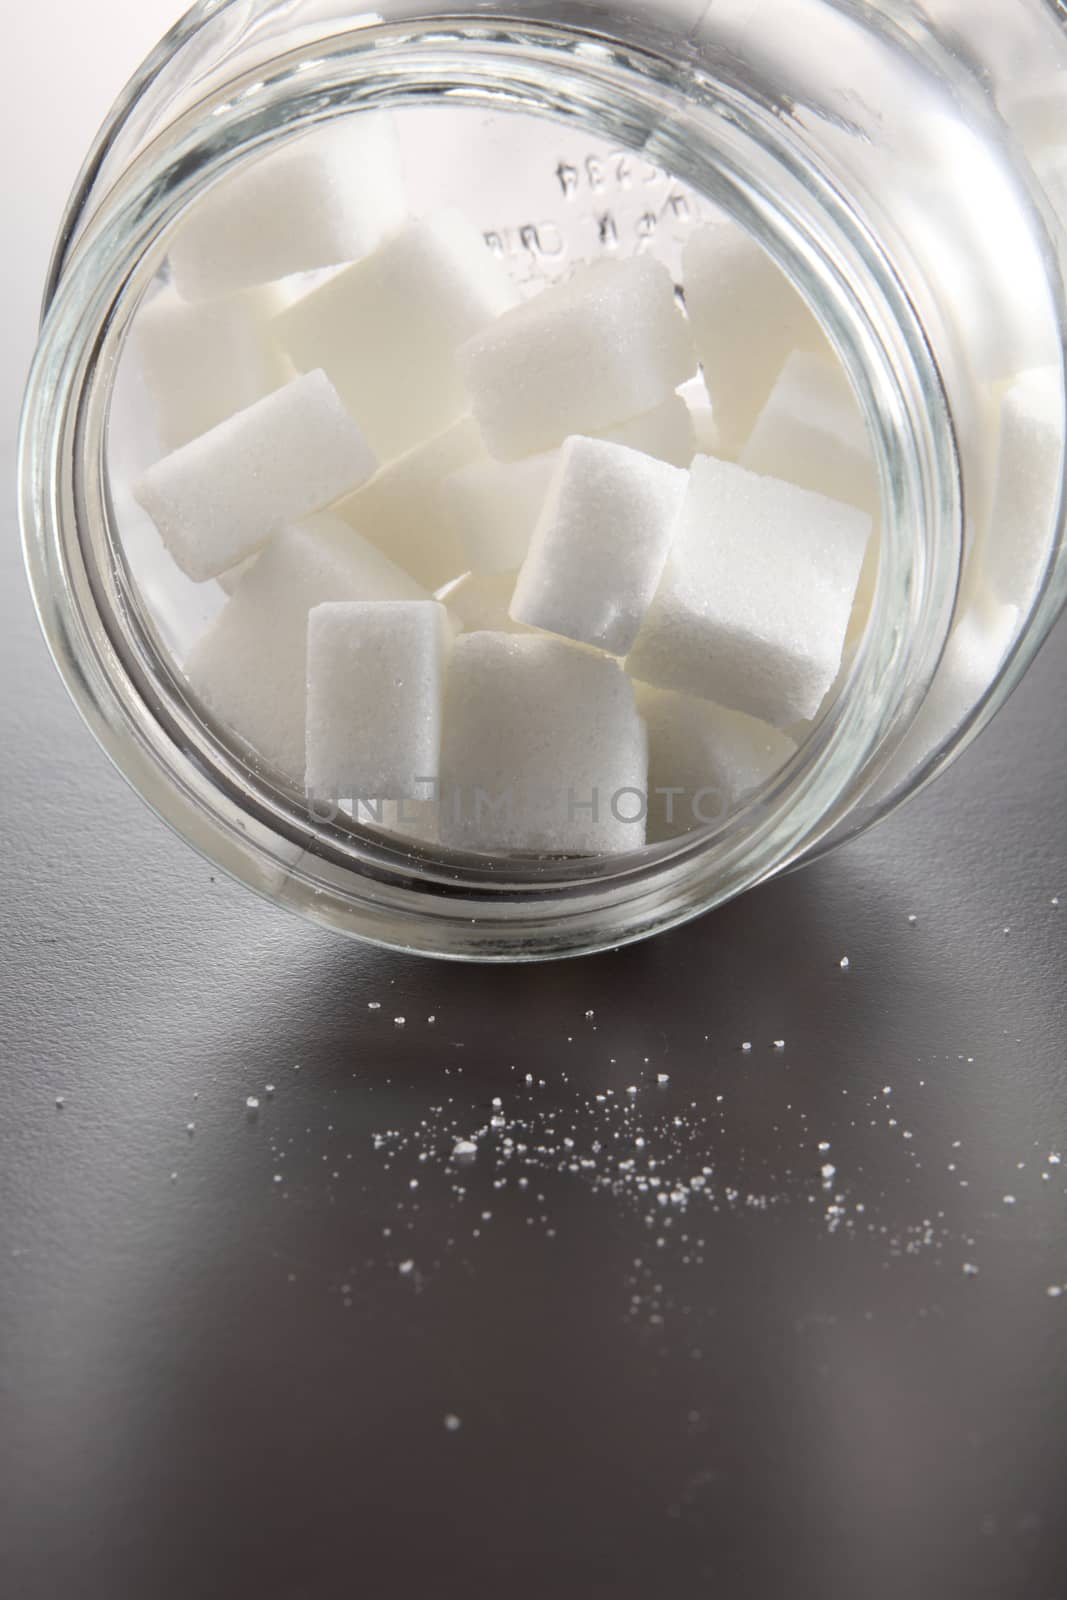 White lump sugar in a glass jar on a gray background, sweet sugar in ware with a glass opened, nobody.